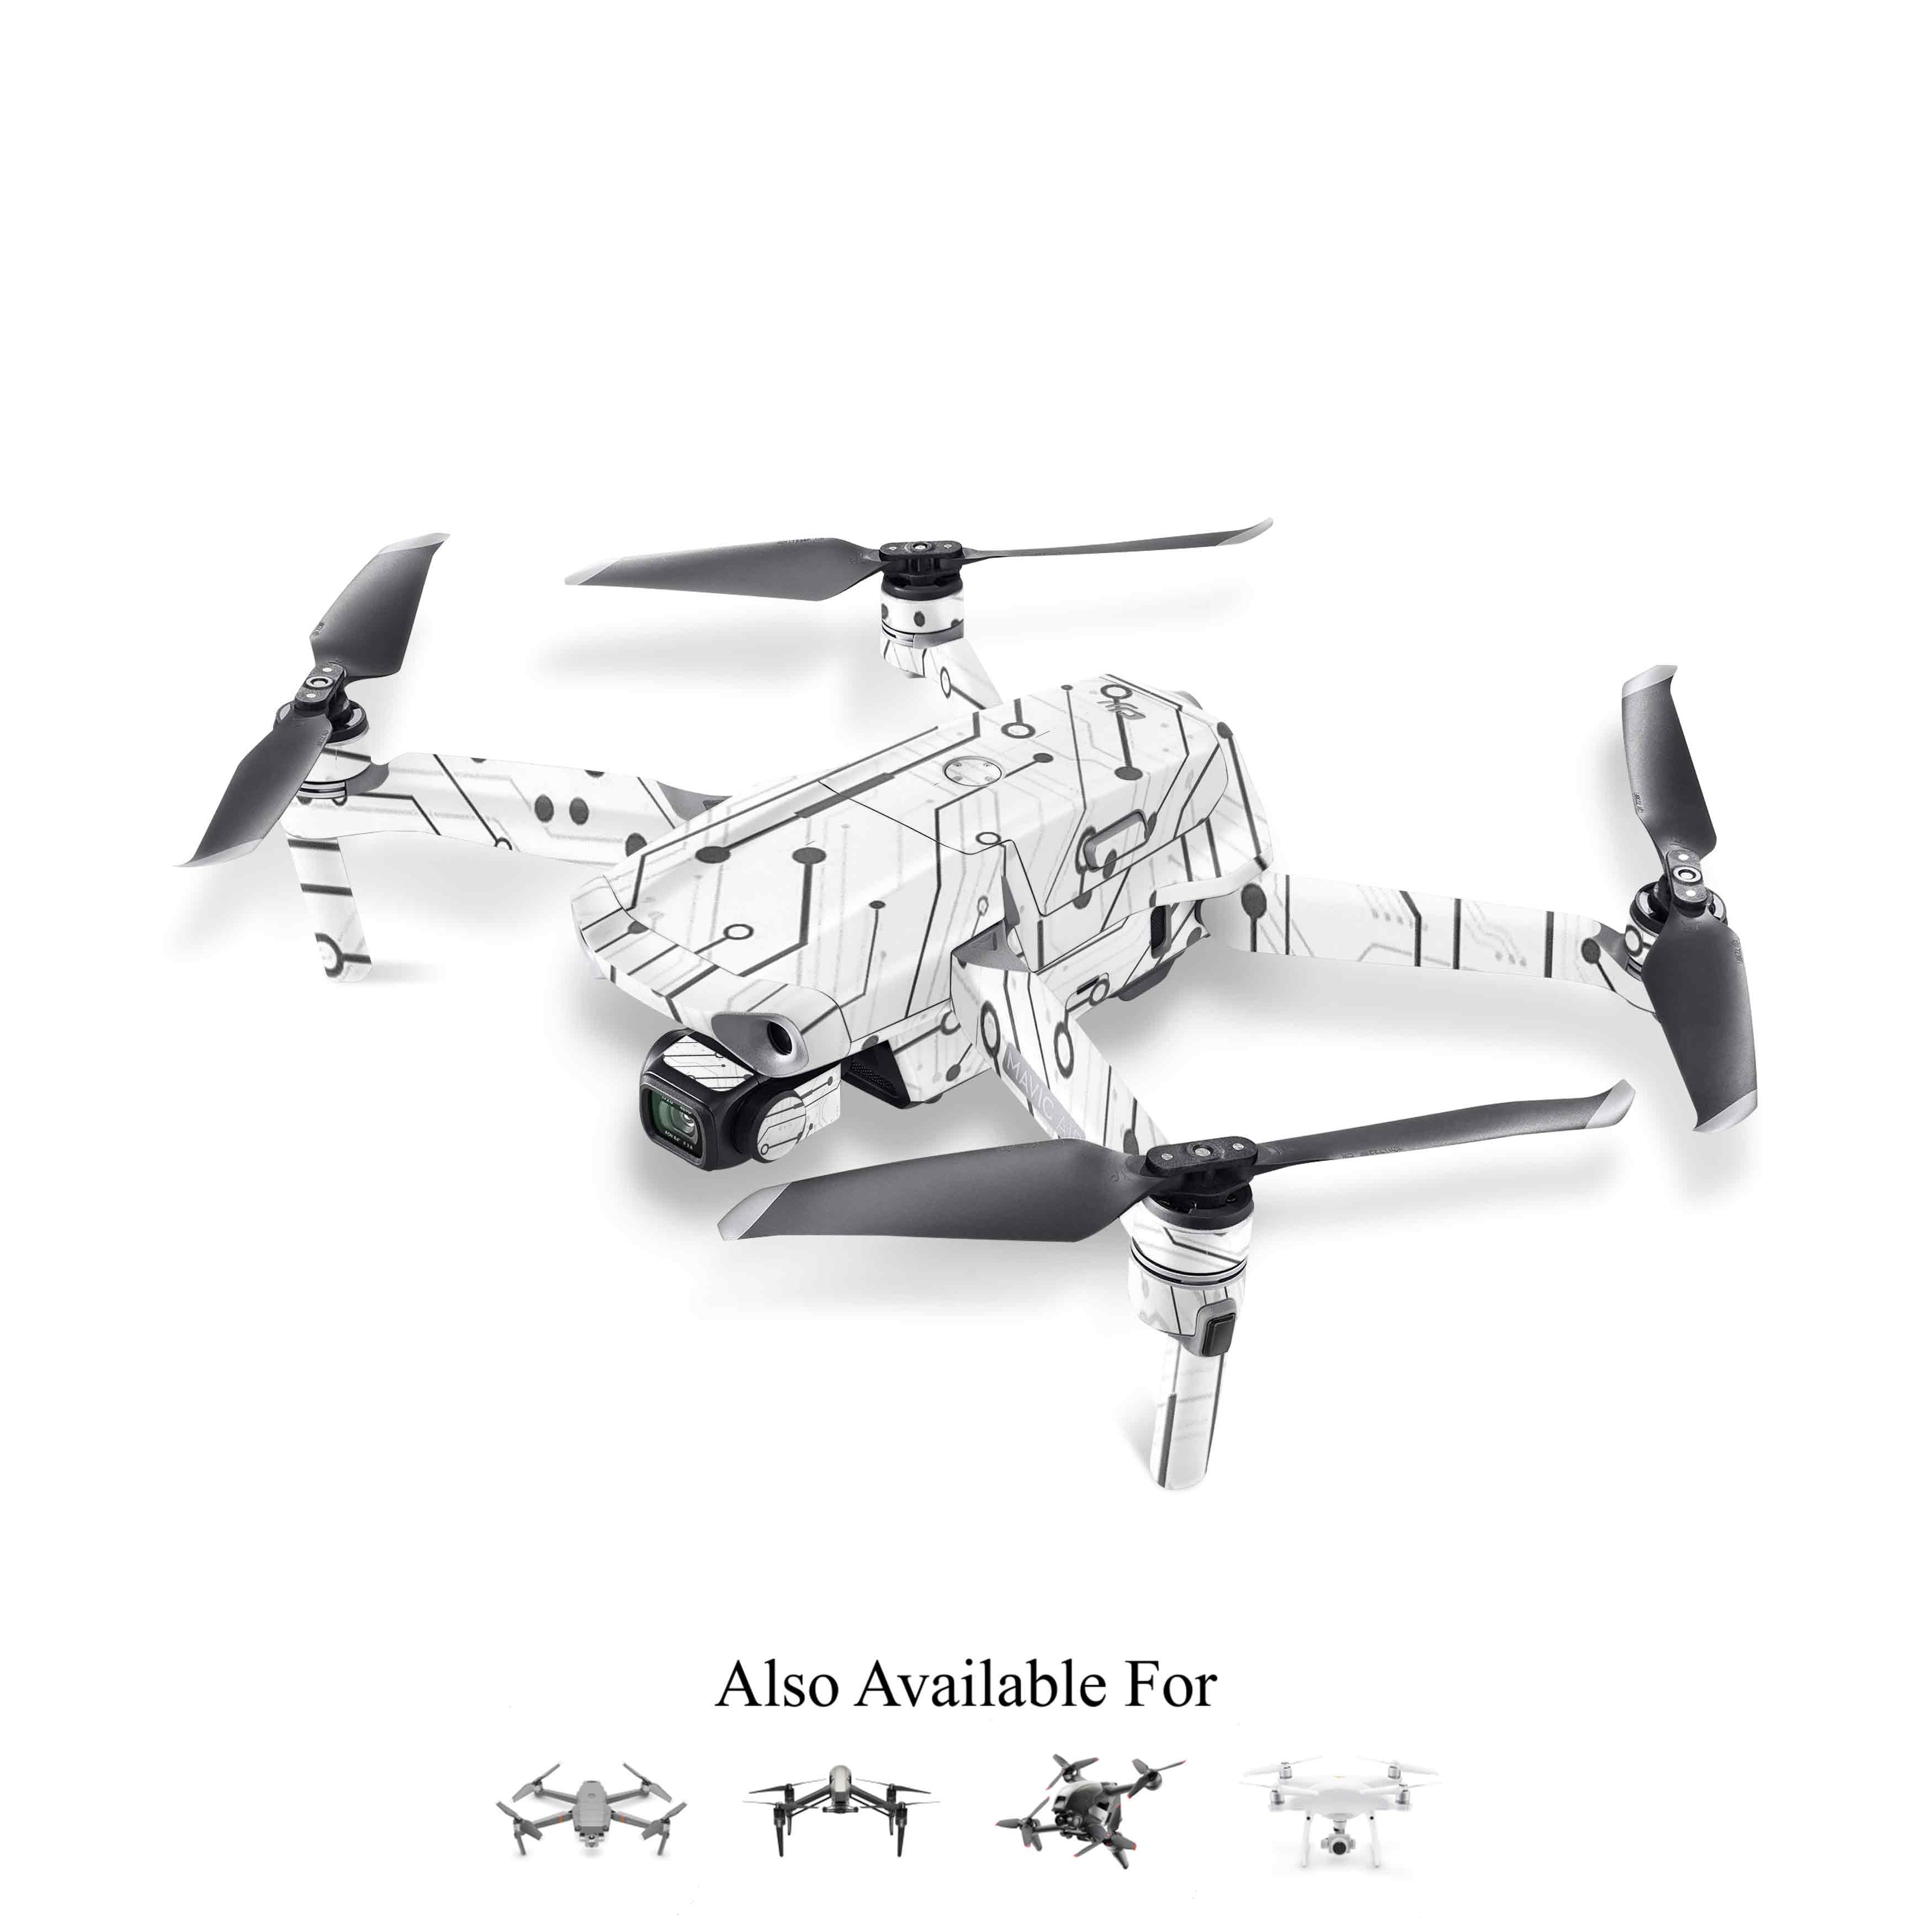 Expand your style with custom Drone skins. Printed drone stickers and camera skins with water resistant technology. Buy these vinly drone wraps from WrapCart.